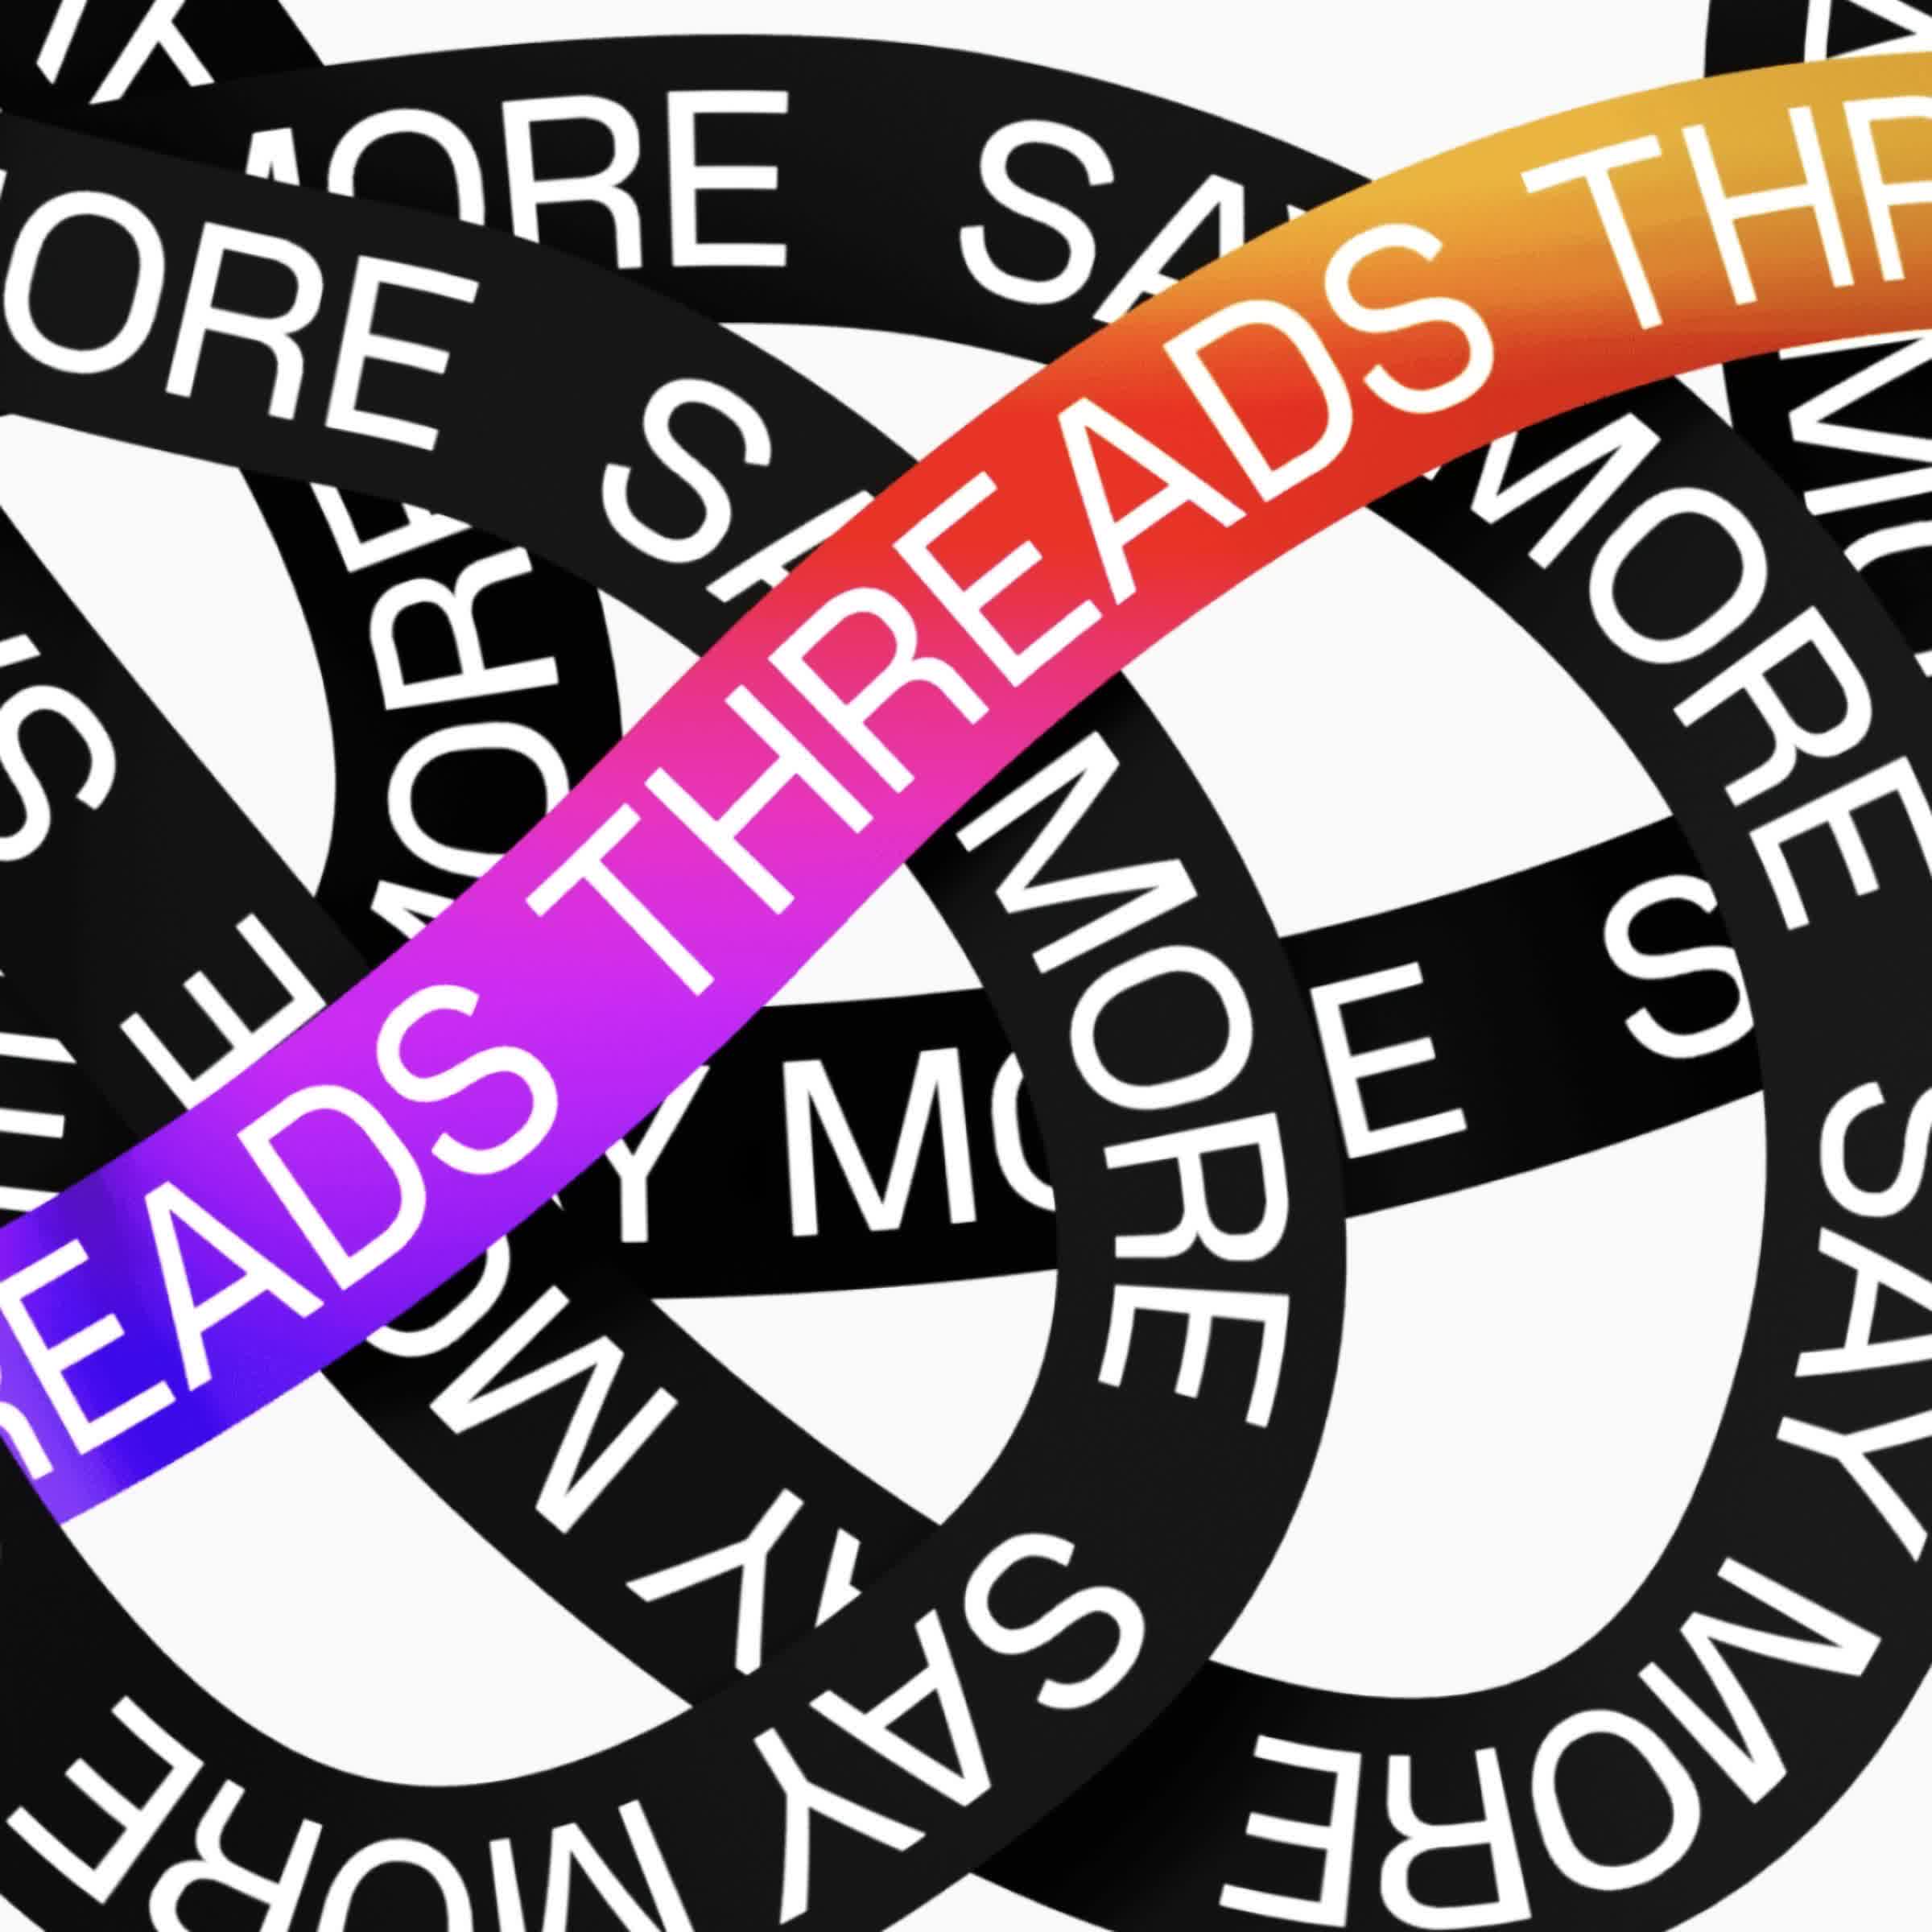 Meta given 30 days to cease using the name Threads by company that trademarked it 11 years ago